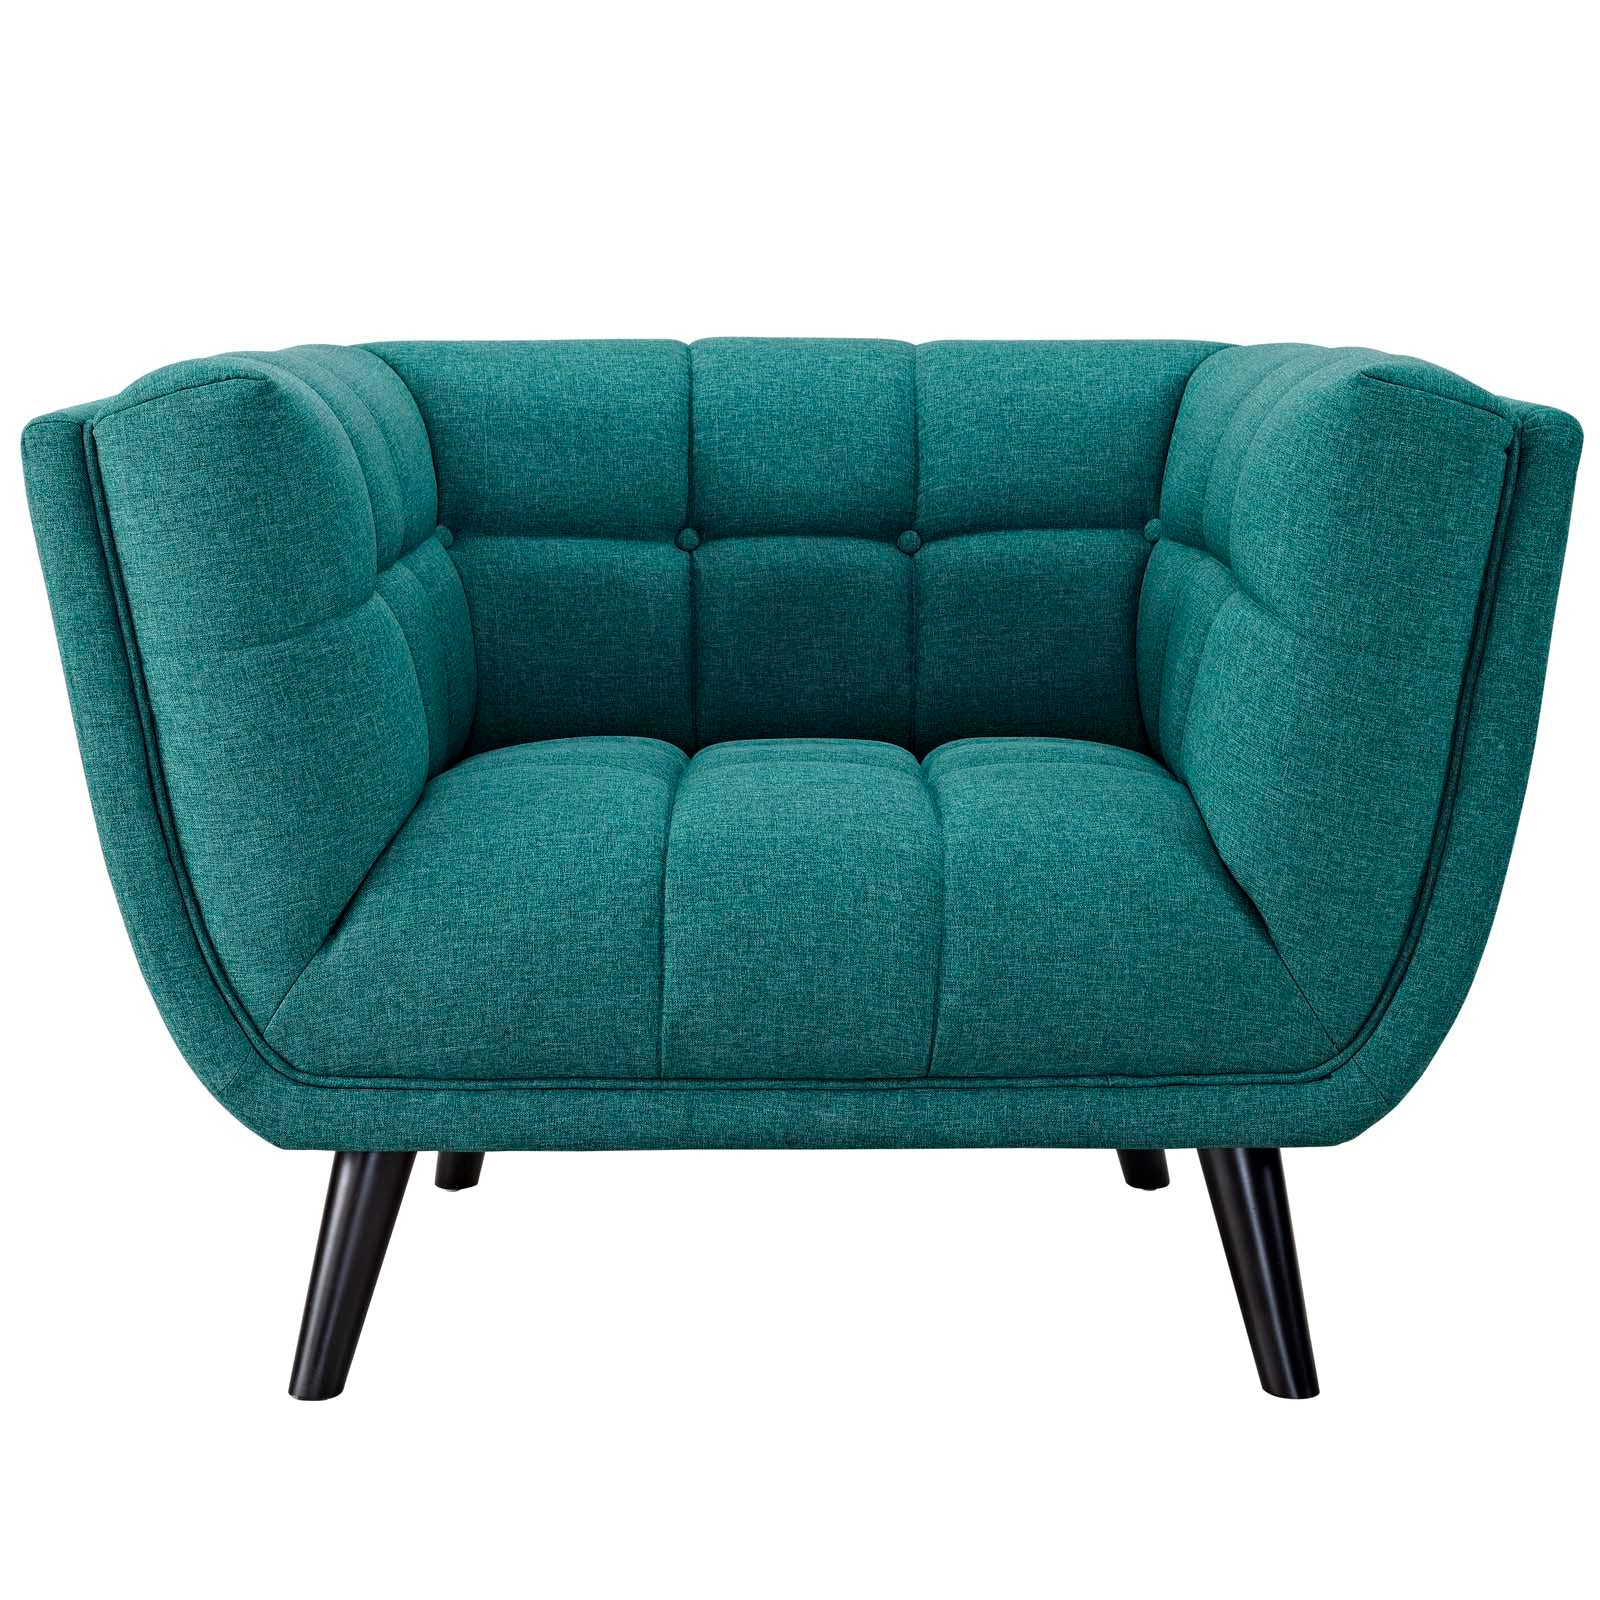 Modway Living Room Sets - Bestow 2 Piece Upholstered Fabric Armchair Set Teal